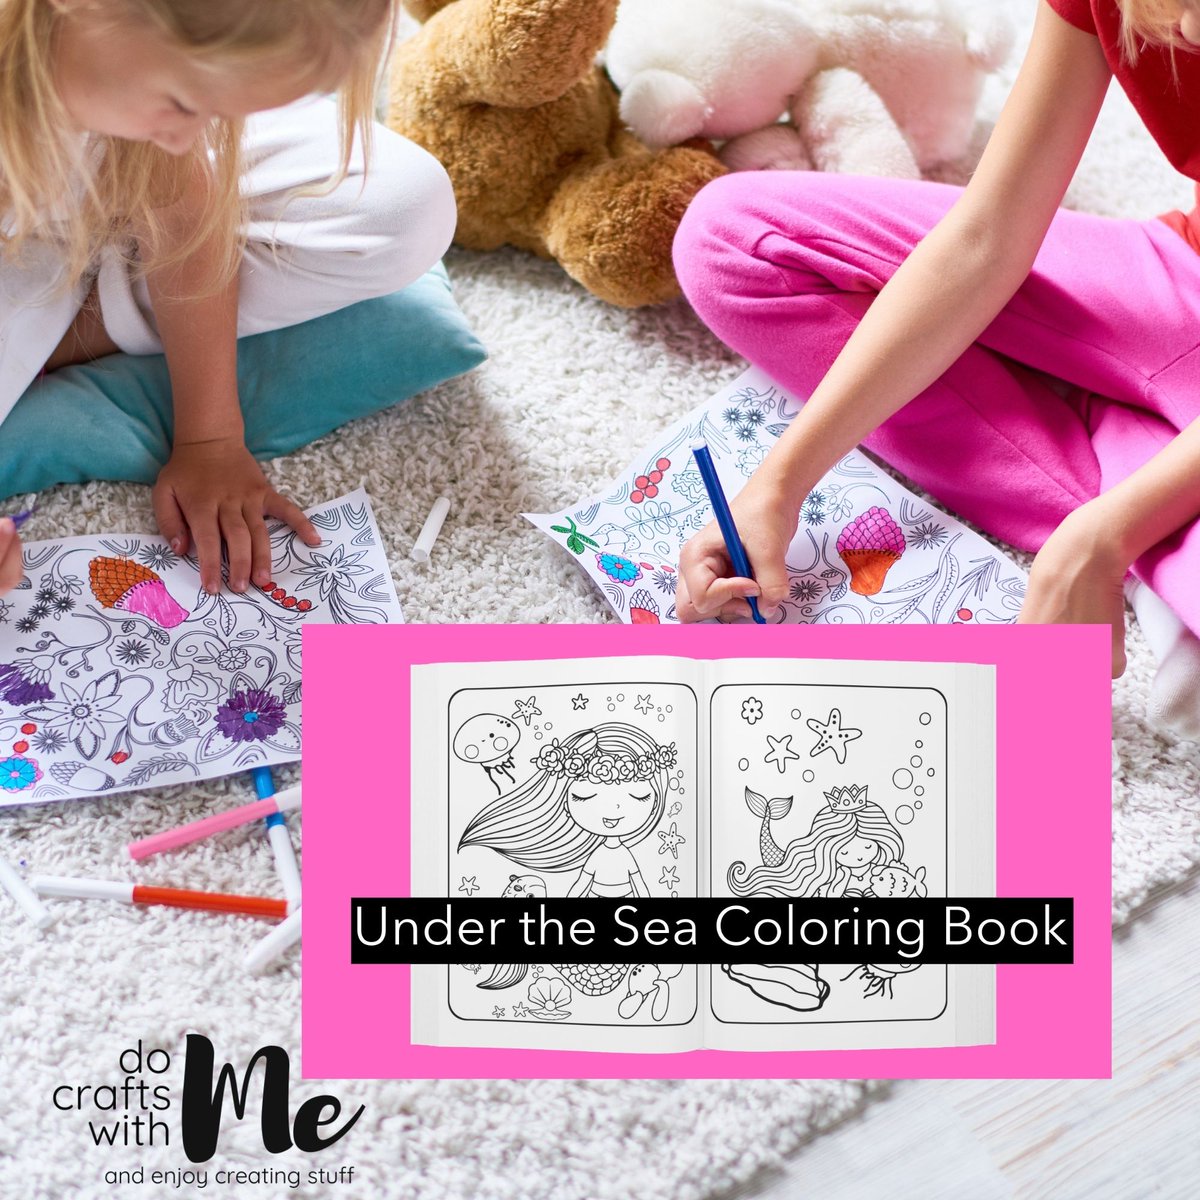 You want to distract your kids; with our digital coloring book you will have fun under the sea coloring pages for entertain your kids for hours!
#coloringbookforkids #coloringbook #coloringpage #coloringbookforchildren #coloringpages #illustrator #drawingsketch #coloringforkid